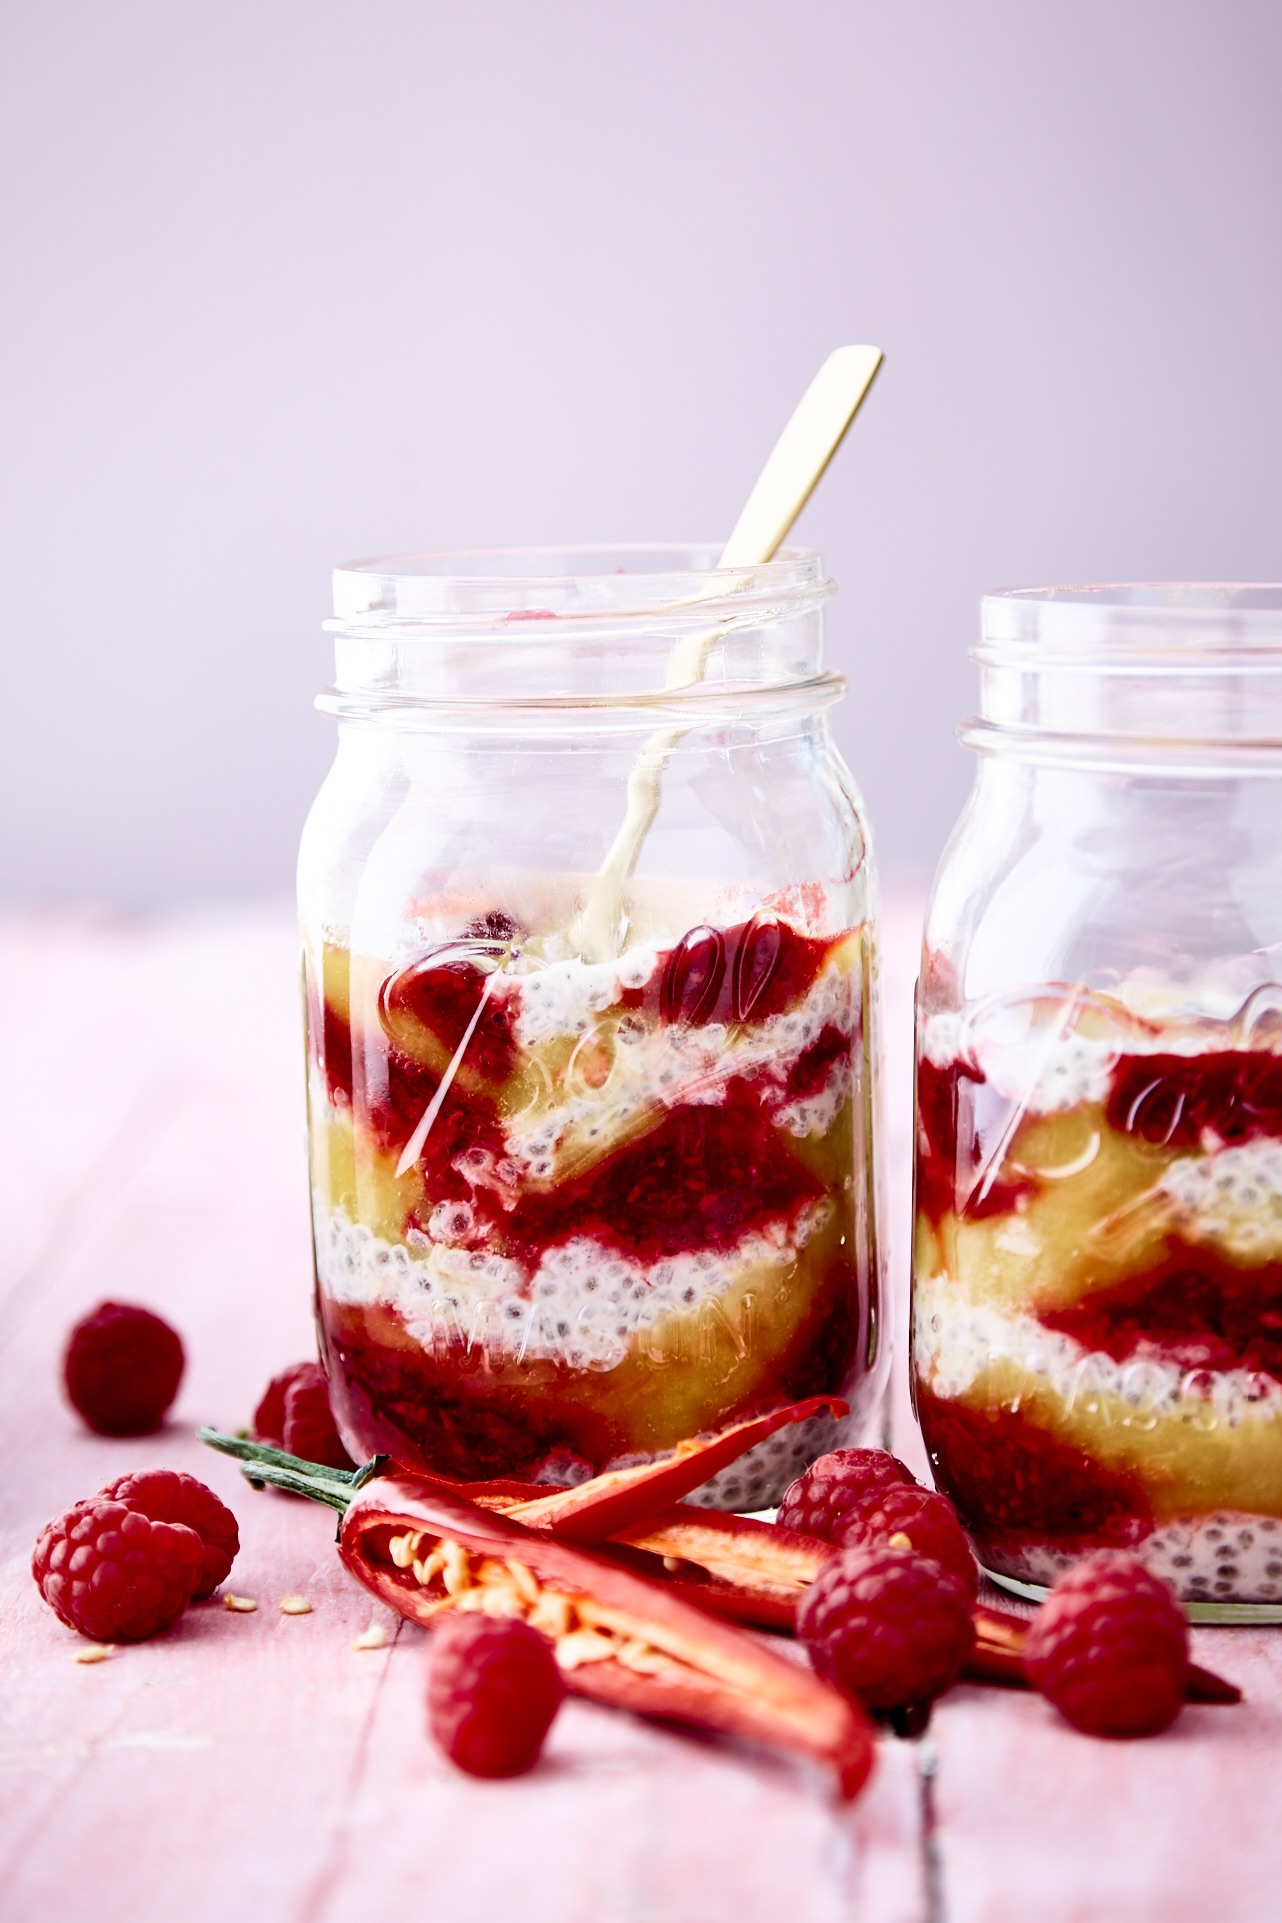 Spicy chia breakfast parfait with mango, ginger and raspberry